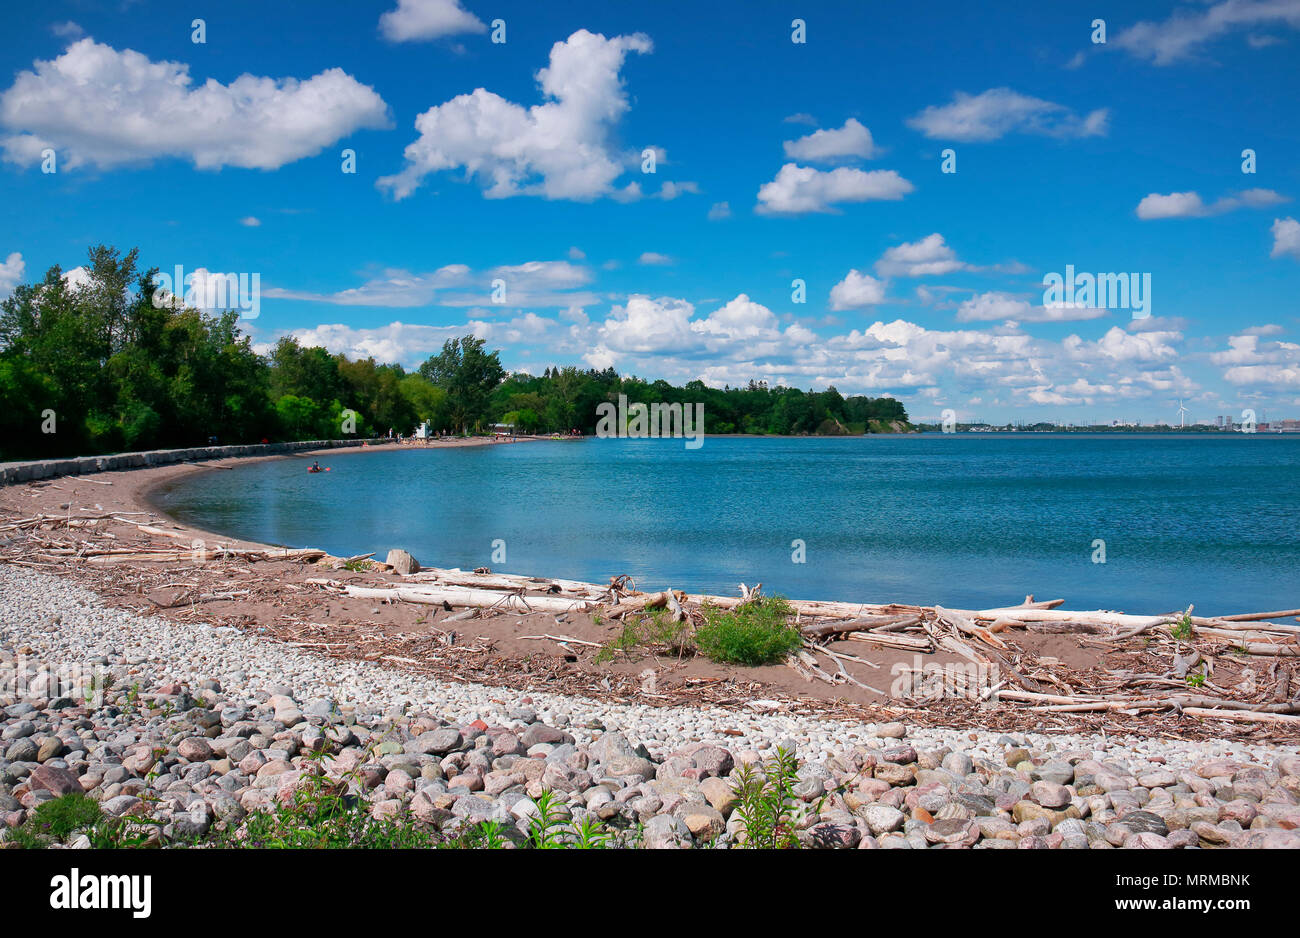 Beautiful sunny day with people on beach in blue water under blue sky and white clouds in Rouge National  Urban Park, Toronto, Ontario, Canada Stock Photo